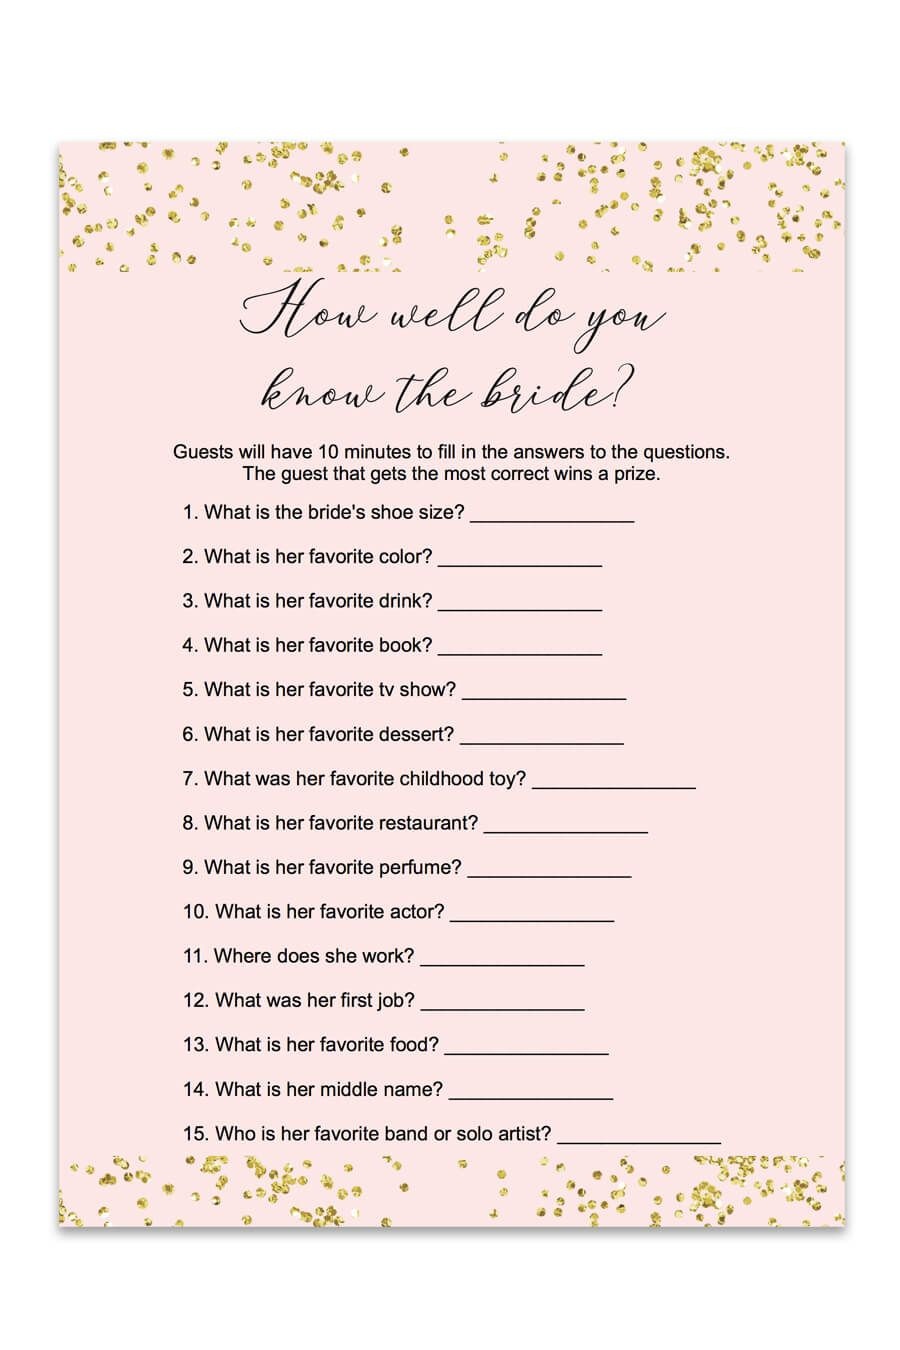 Blush And Confetti How Well Do You Know The Bride Game | Love&amp;lt;3 - How Well Do You Know The Bride Free Printable